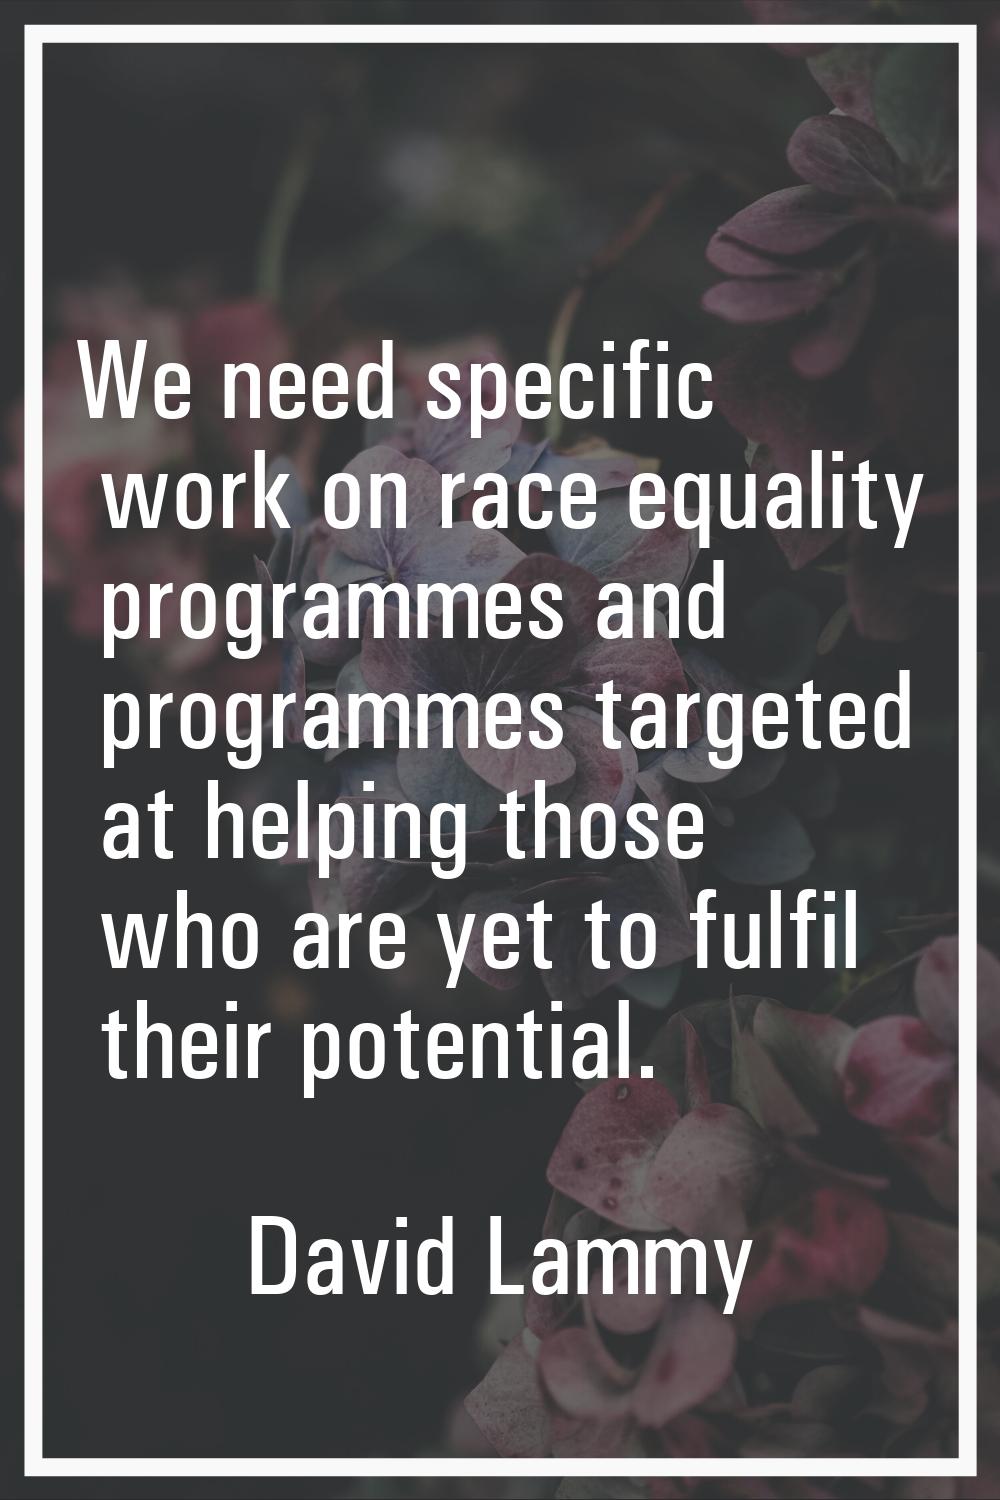 We need specific work on race equality programmes and programmes targeted at helping those who are 